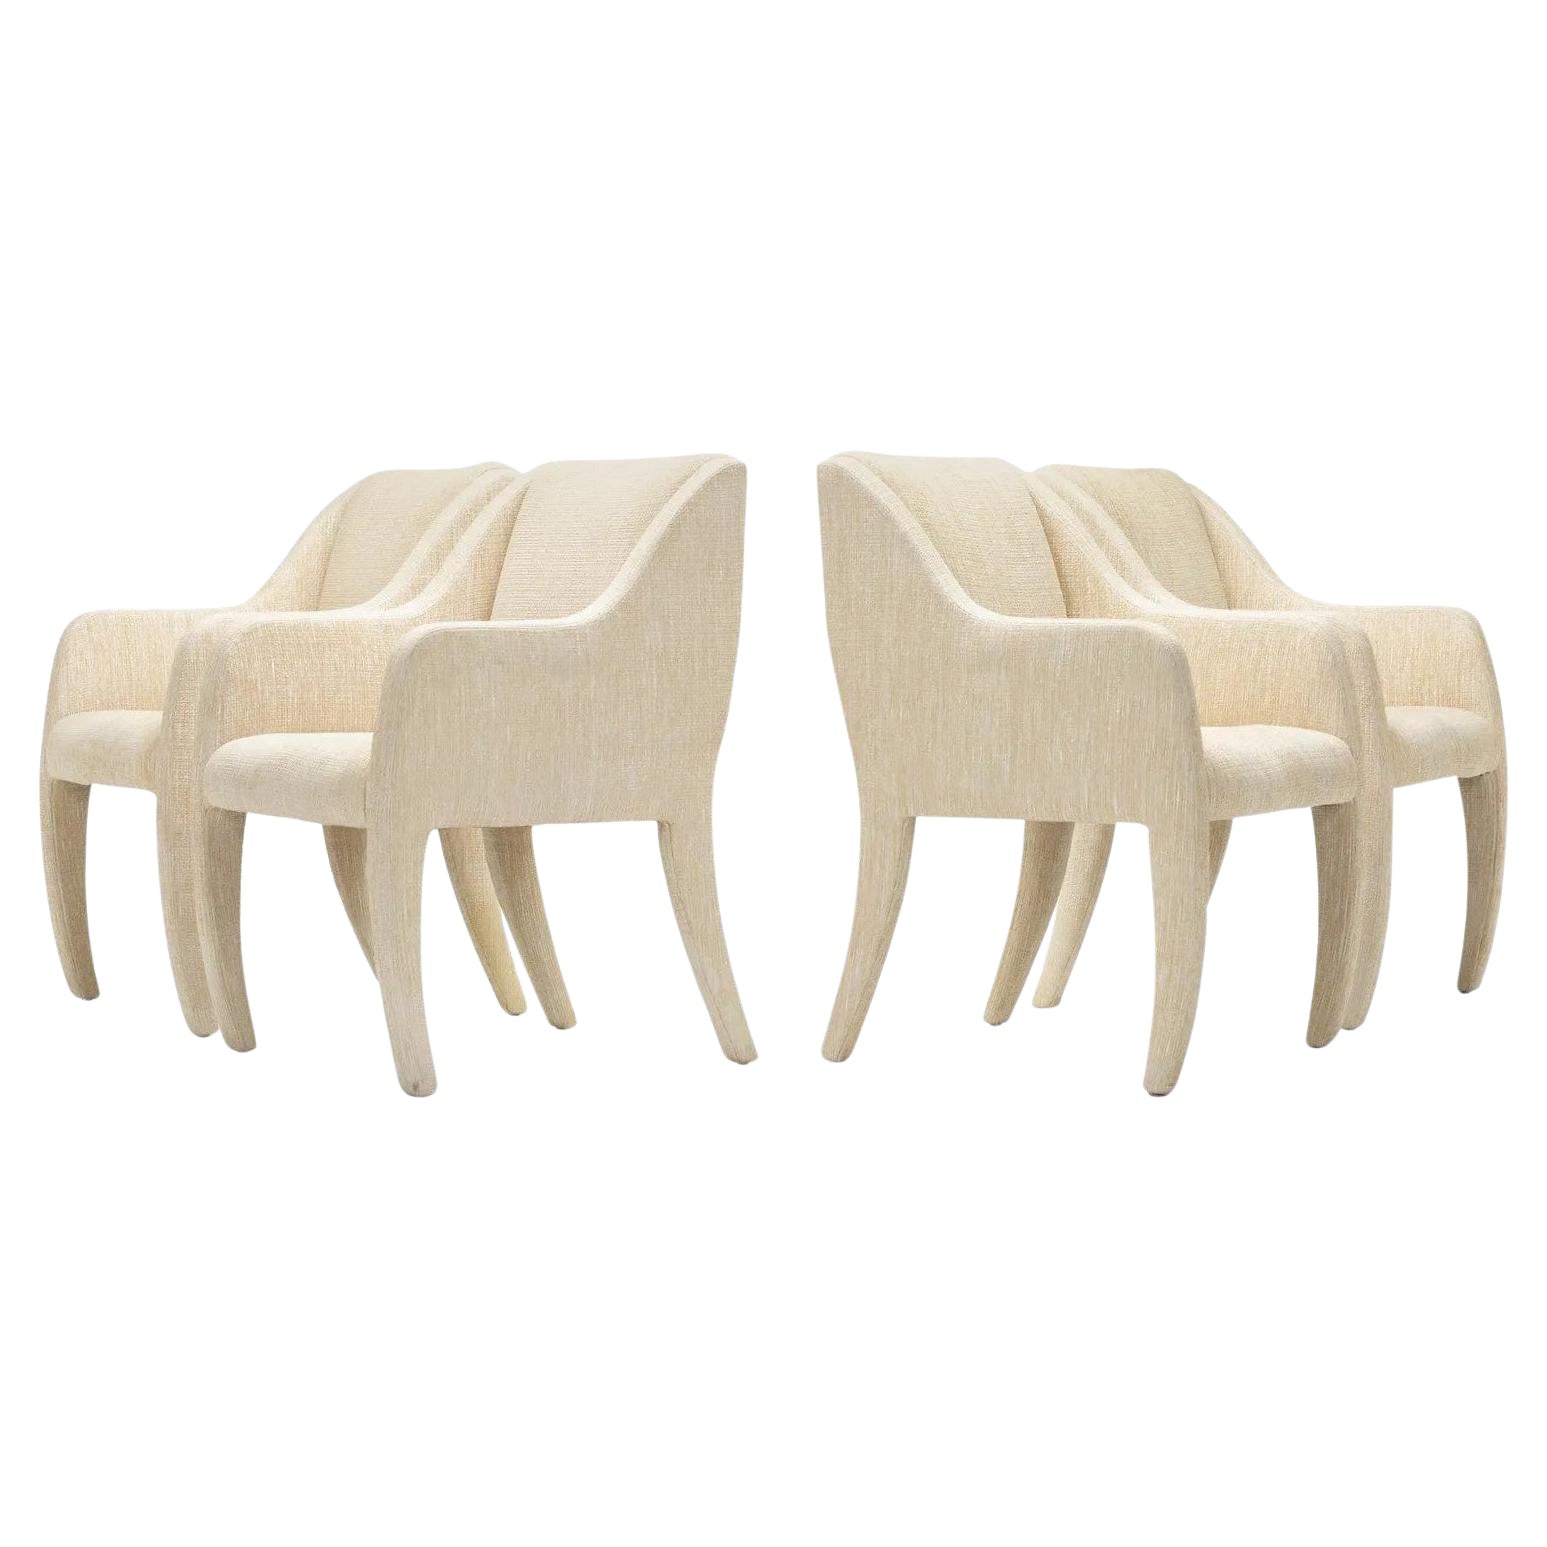 Four Sculptural Dining Chairs by Directional